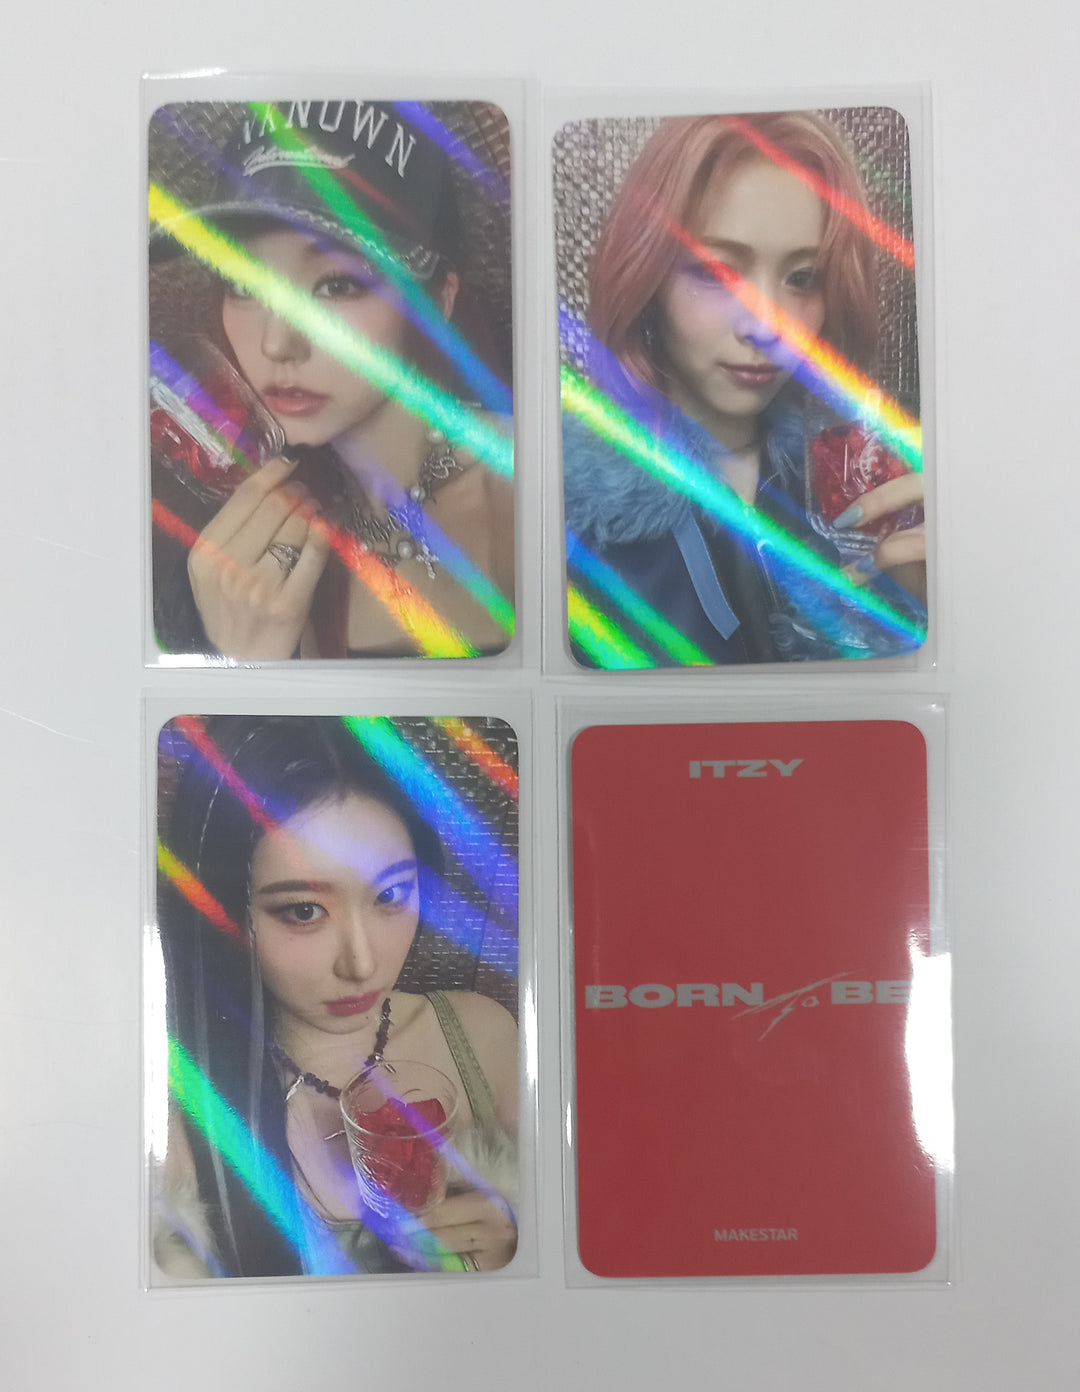 ITZY "BORN TO BE" - Makestar Pre-Order Benefit Hologram Photocard [24.1.12]